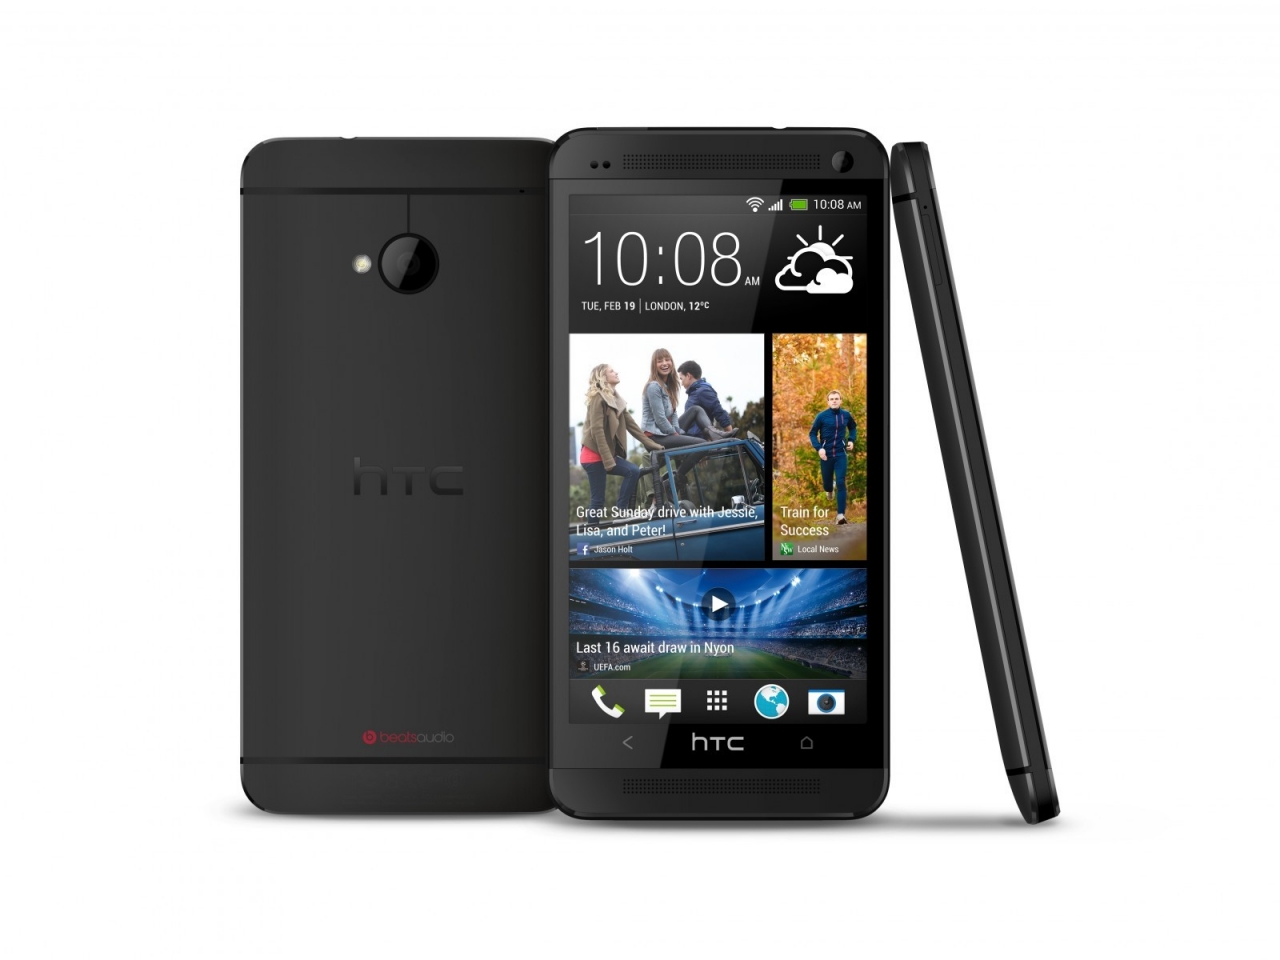 New HTC One for 1280 x 960 resolution